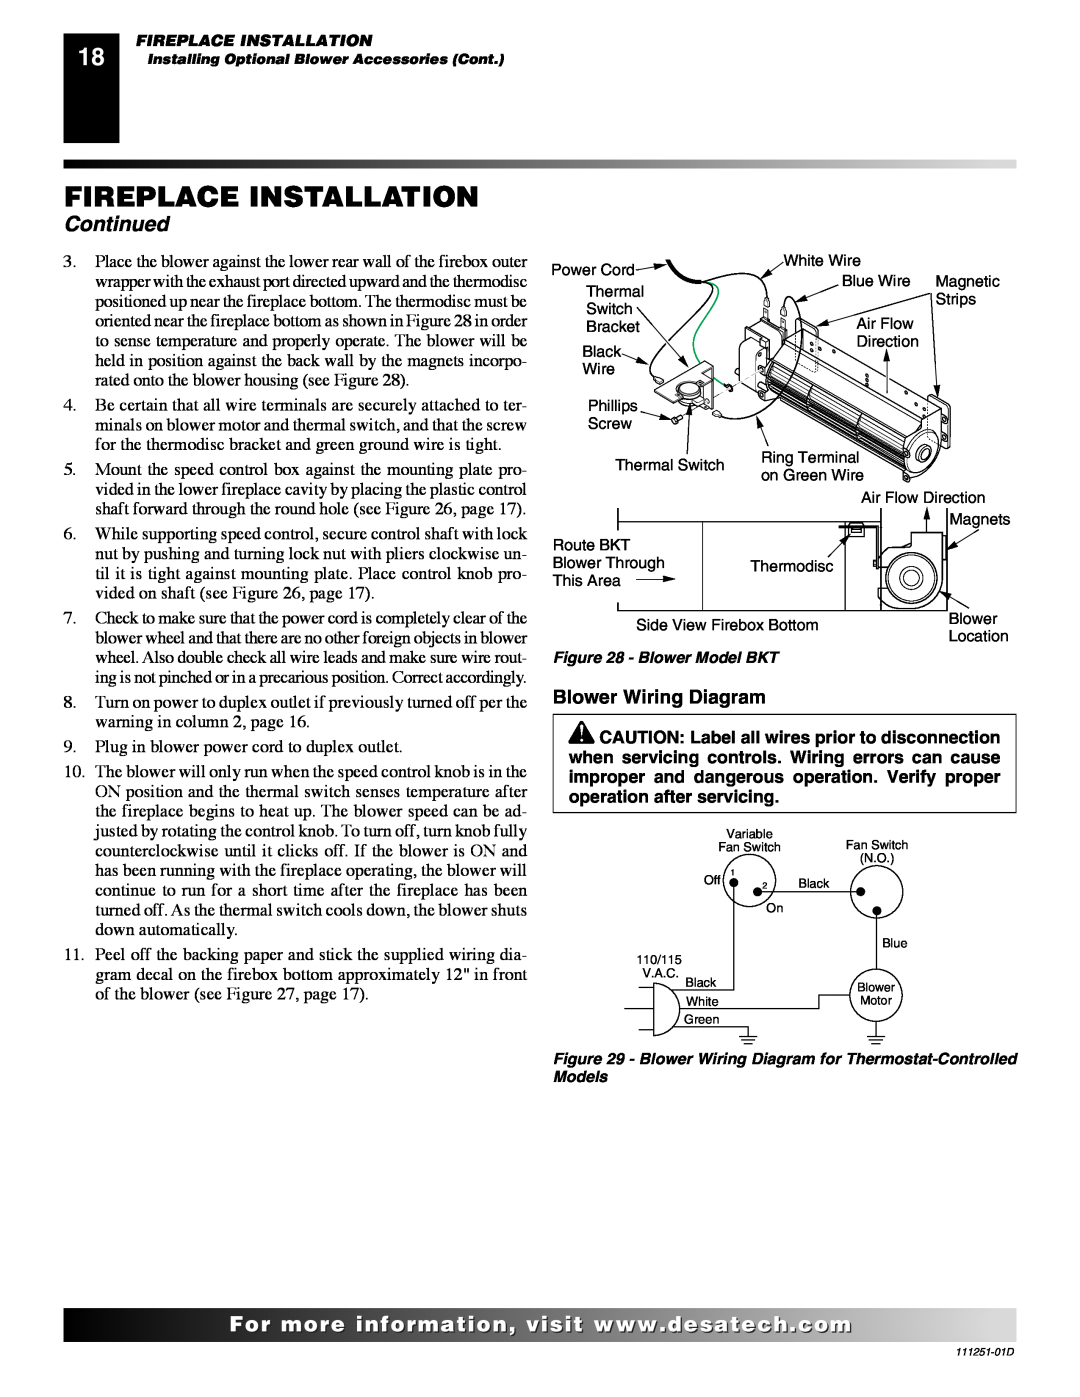 Desa (V)T36EPA SERIES, (V)T36ENA SERIES installation manual Fireplace Installation, Continued, Blower Wiring Diagram 